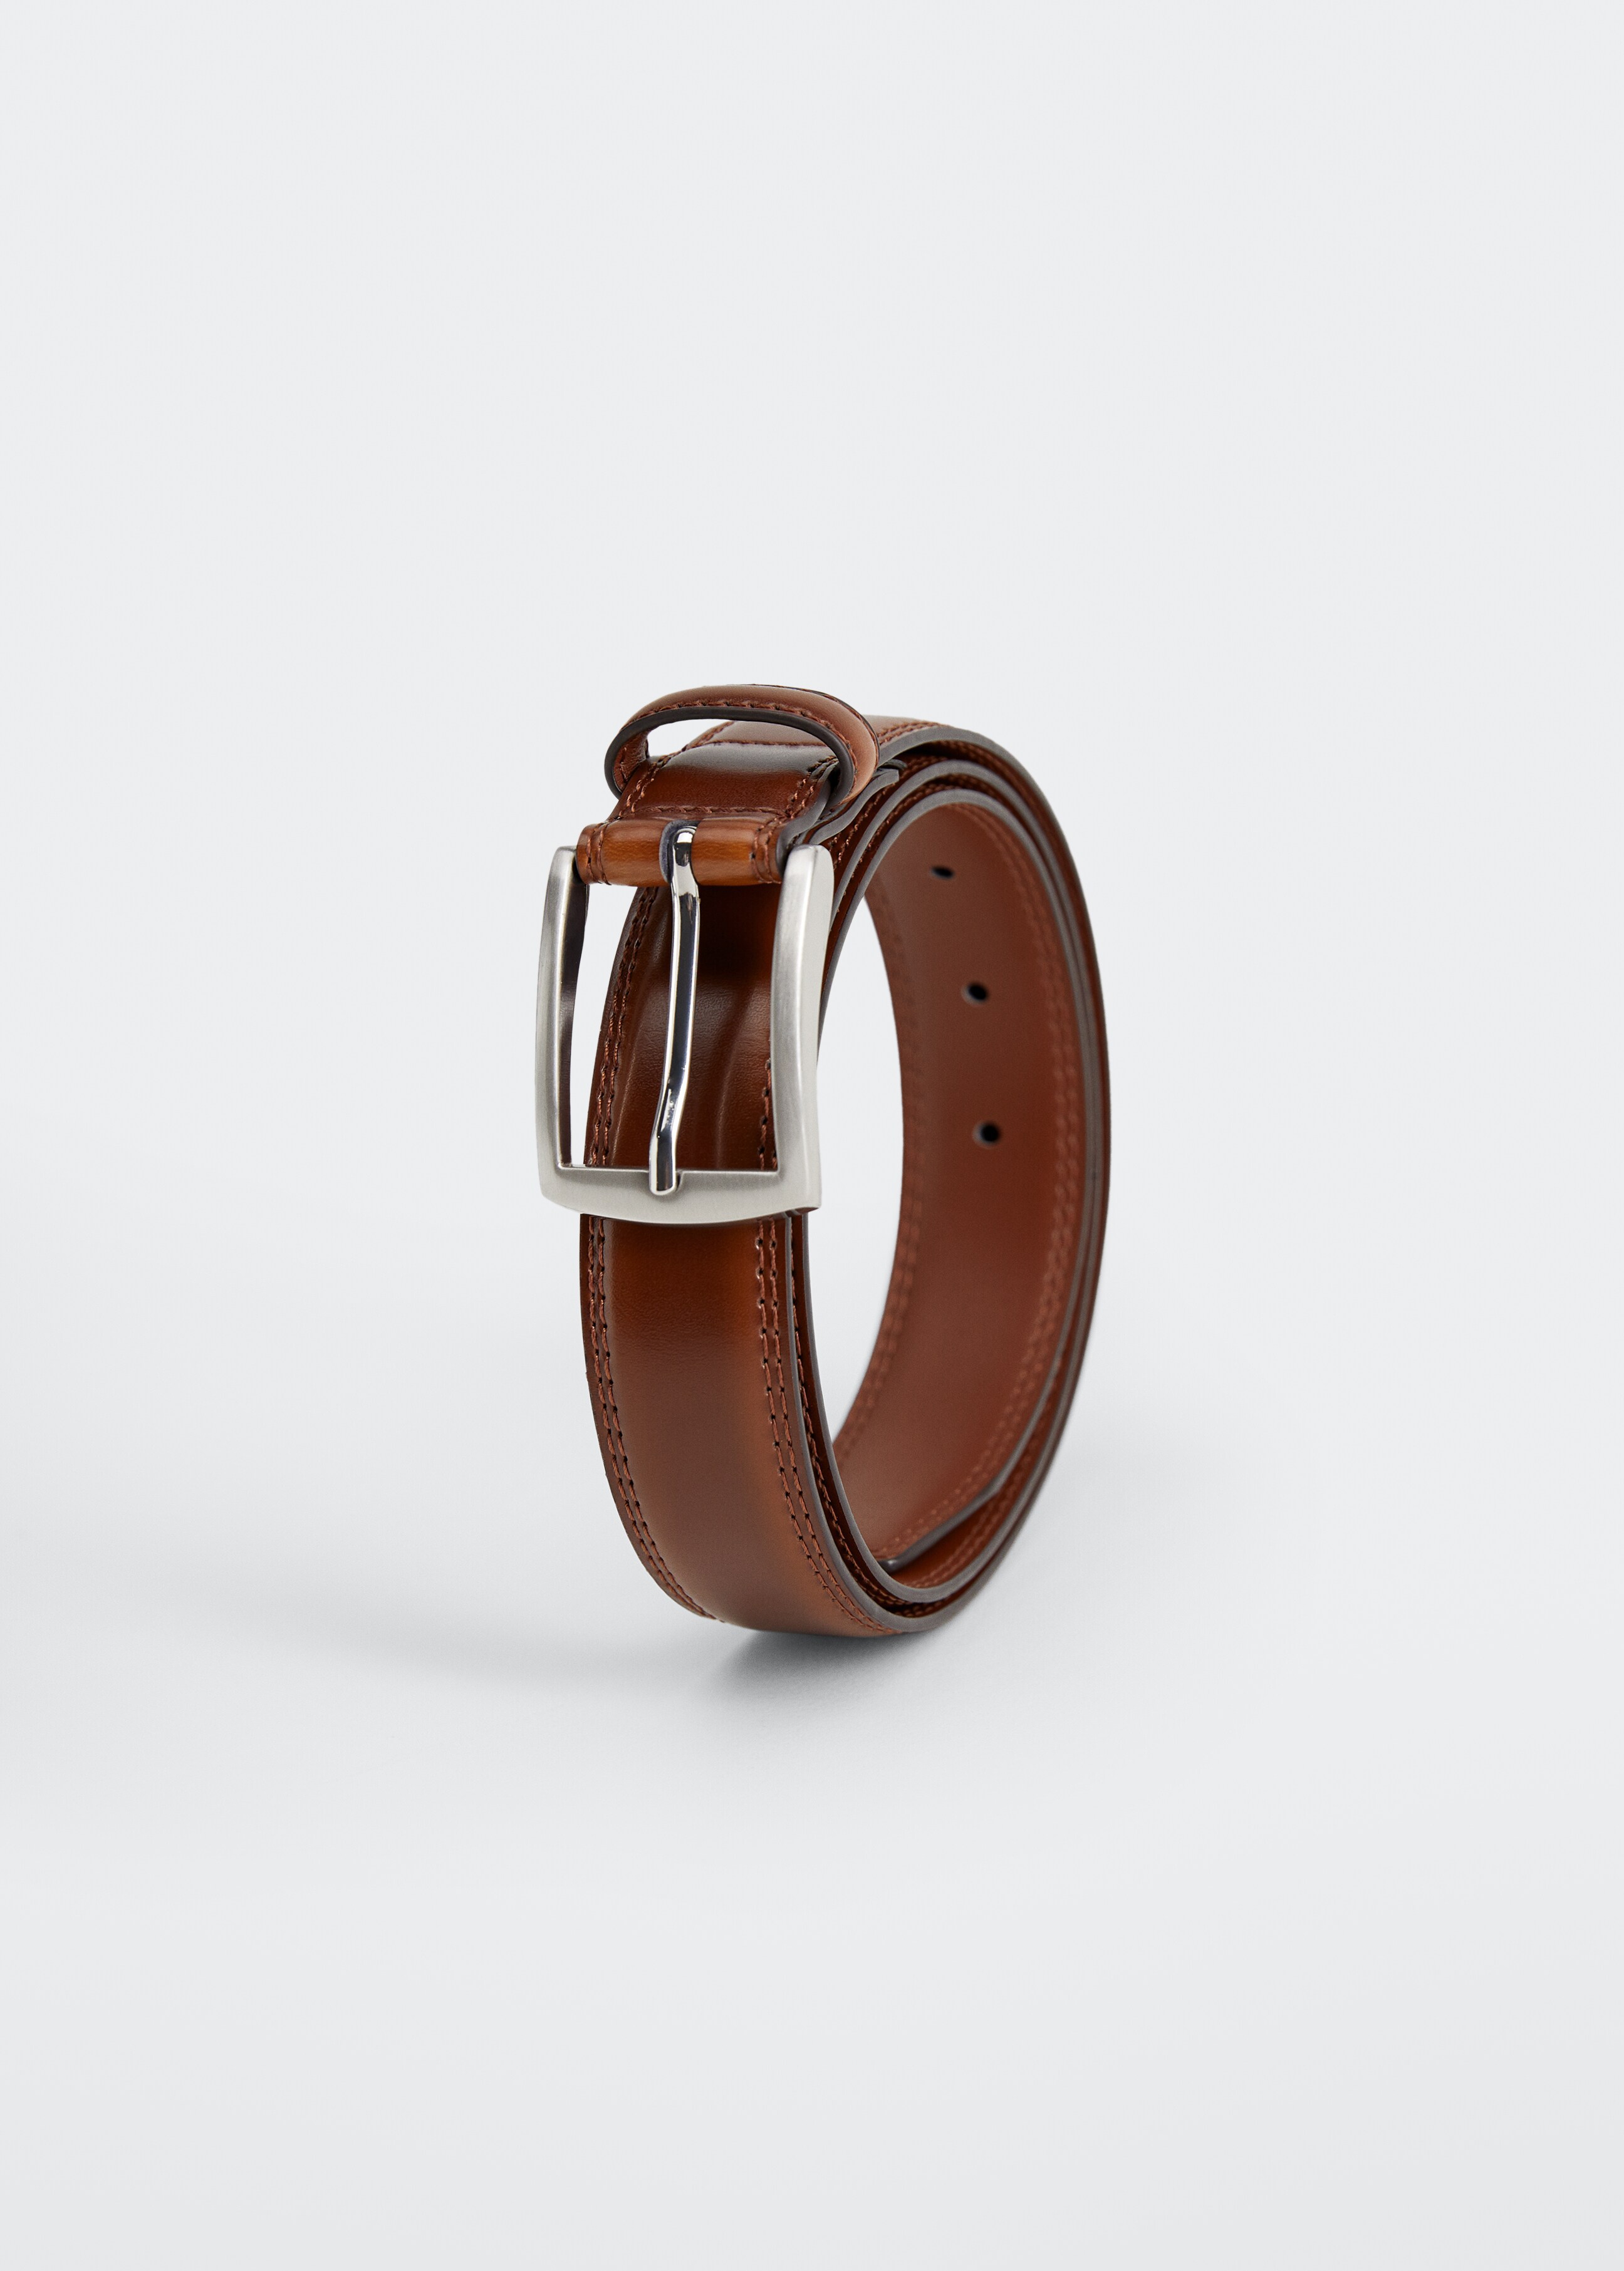 Leather belt - Details of the article 3